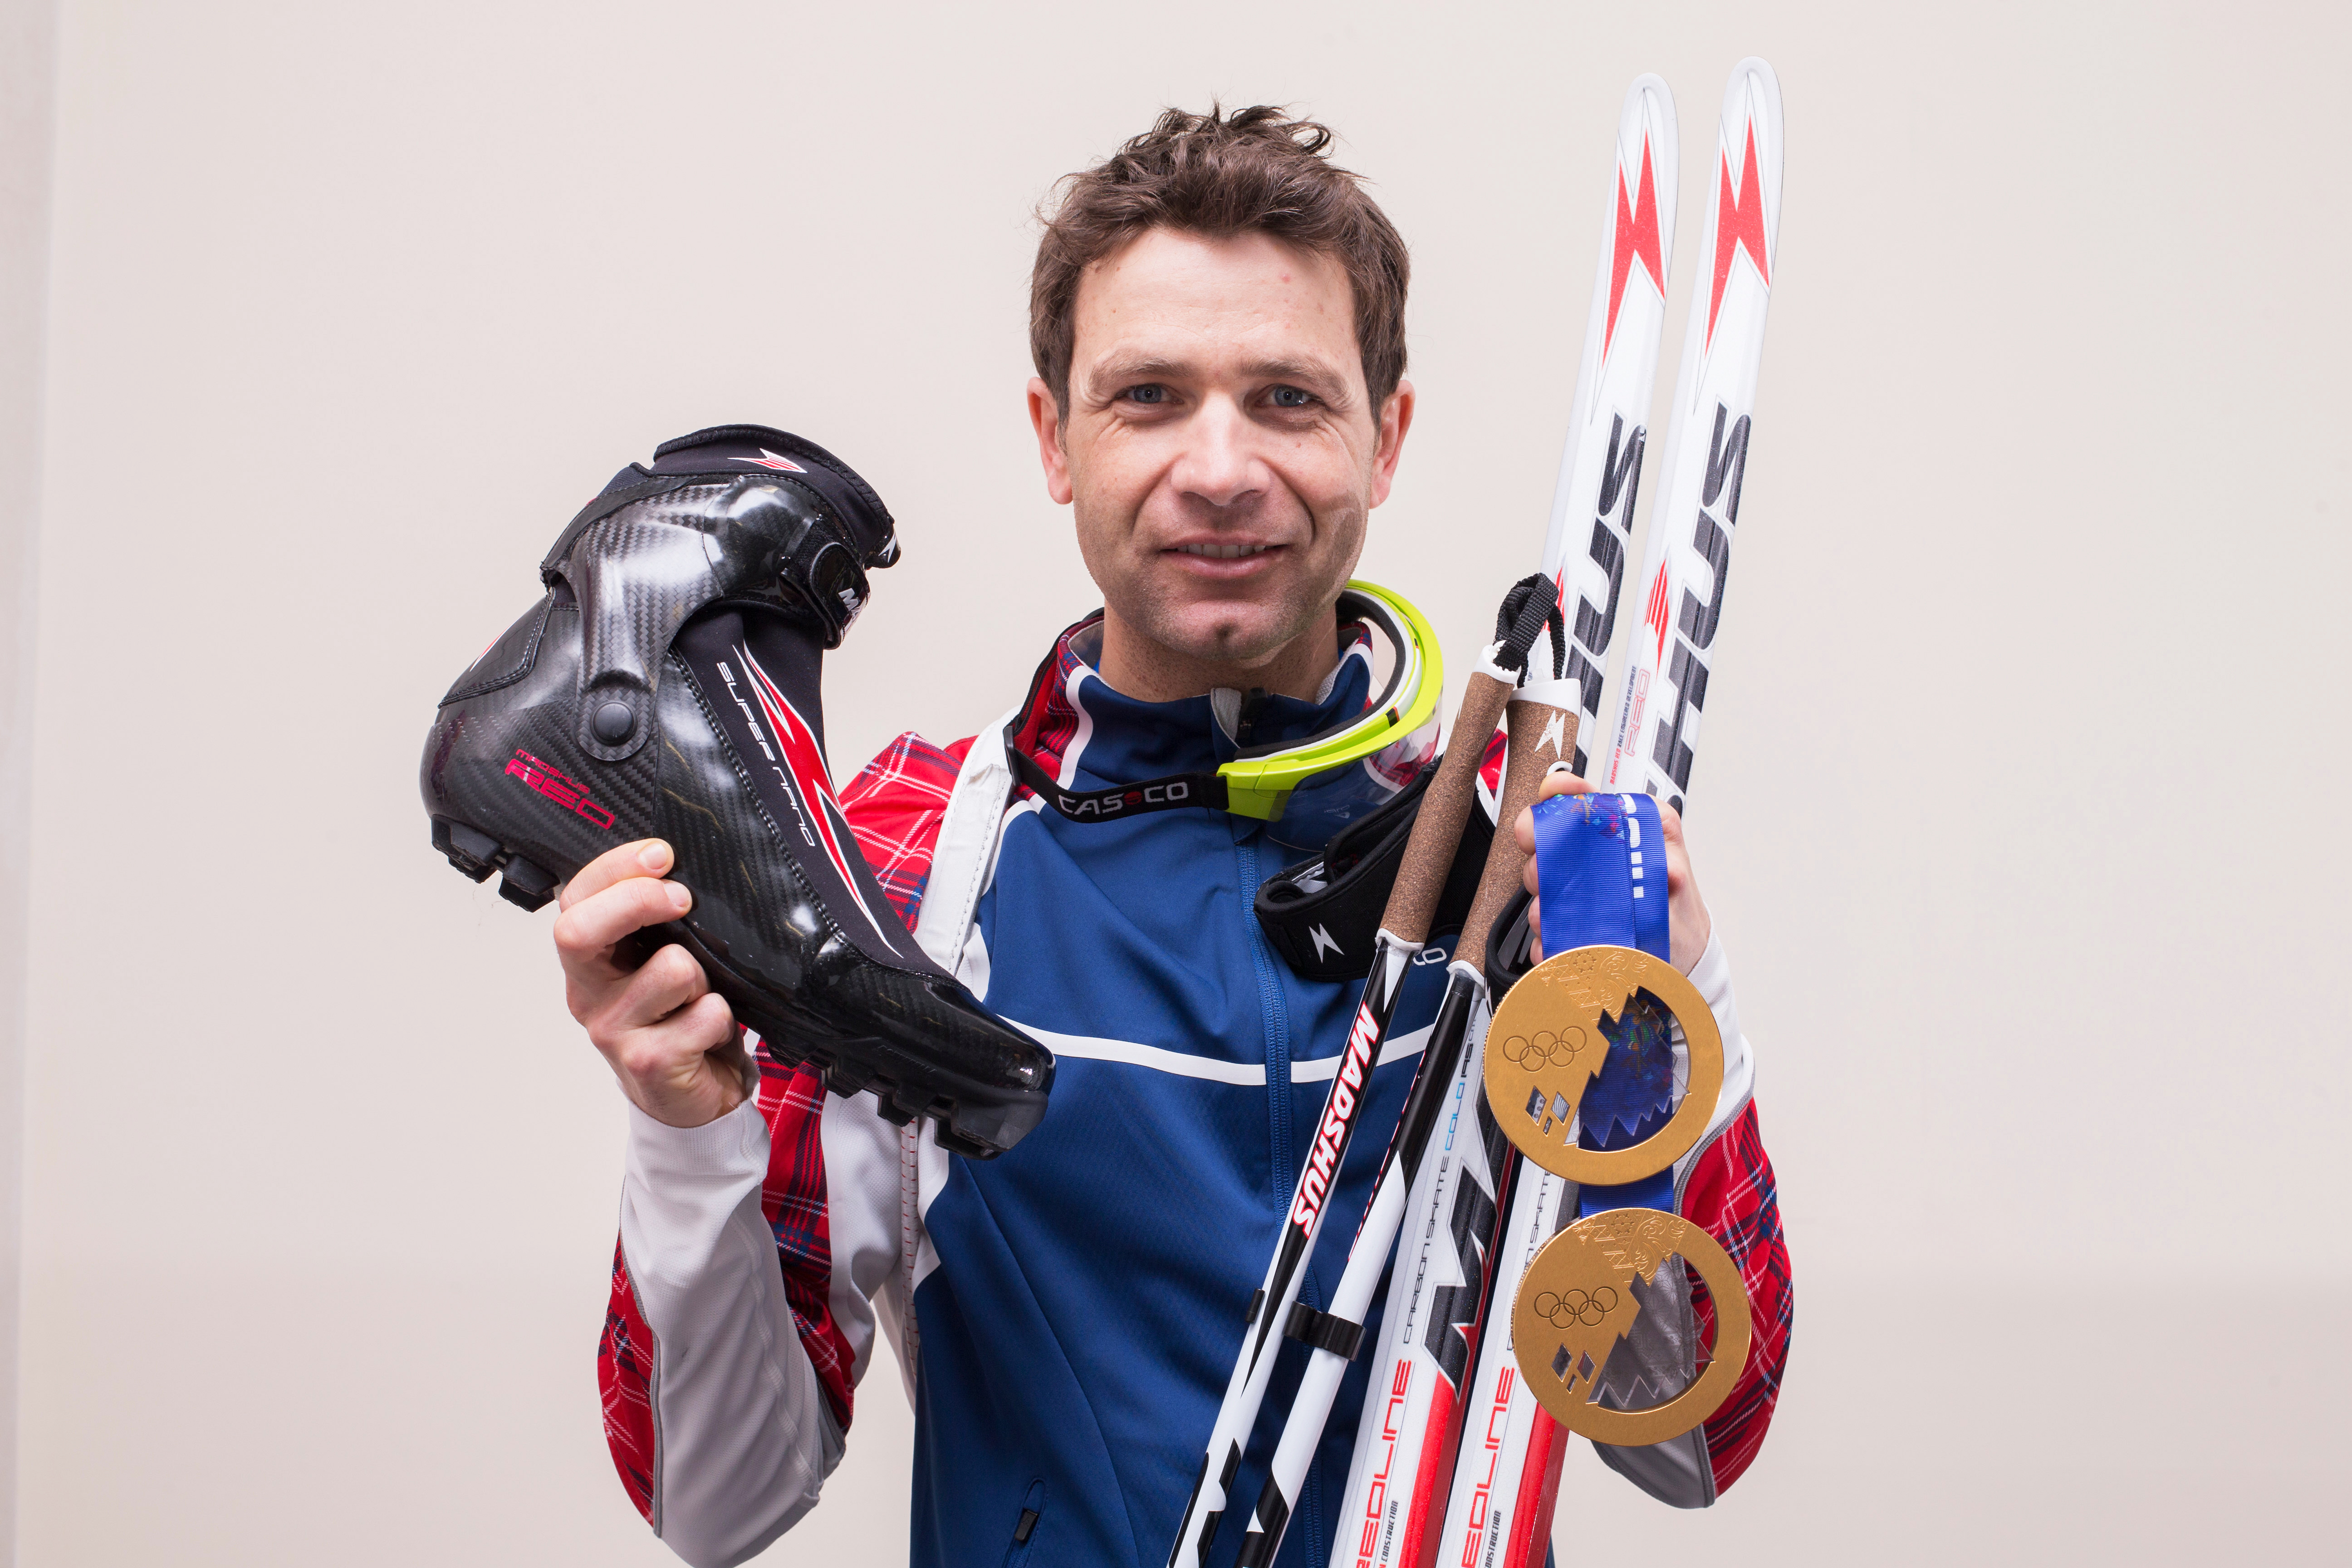 Ole Einar Bjørndalen with his two gold medals from Sochi. With two decades of receiving the very best skis on the circuit and building a fleet, he could afford to skip using his best pair in Ostersund and saving their bases from the rocks that littered the trails, and still rack up the second-fastest ski time in Saturday's race. (Photo: Madshus/NordicFocus)